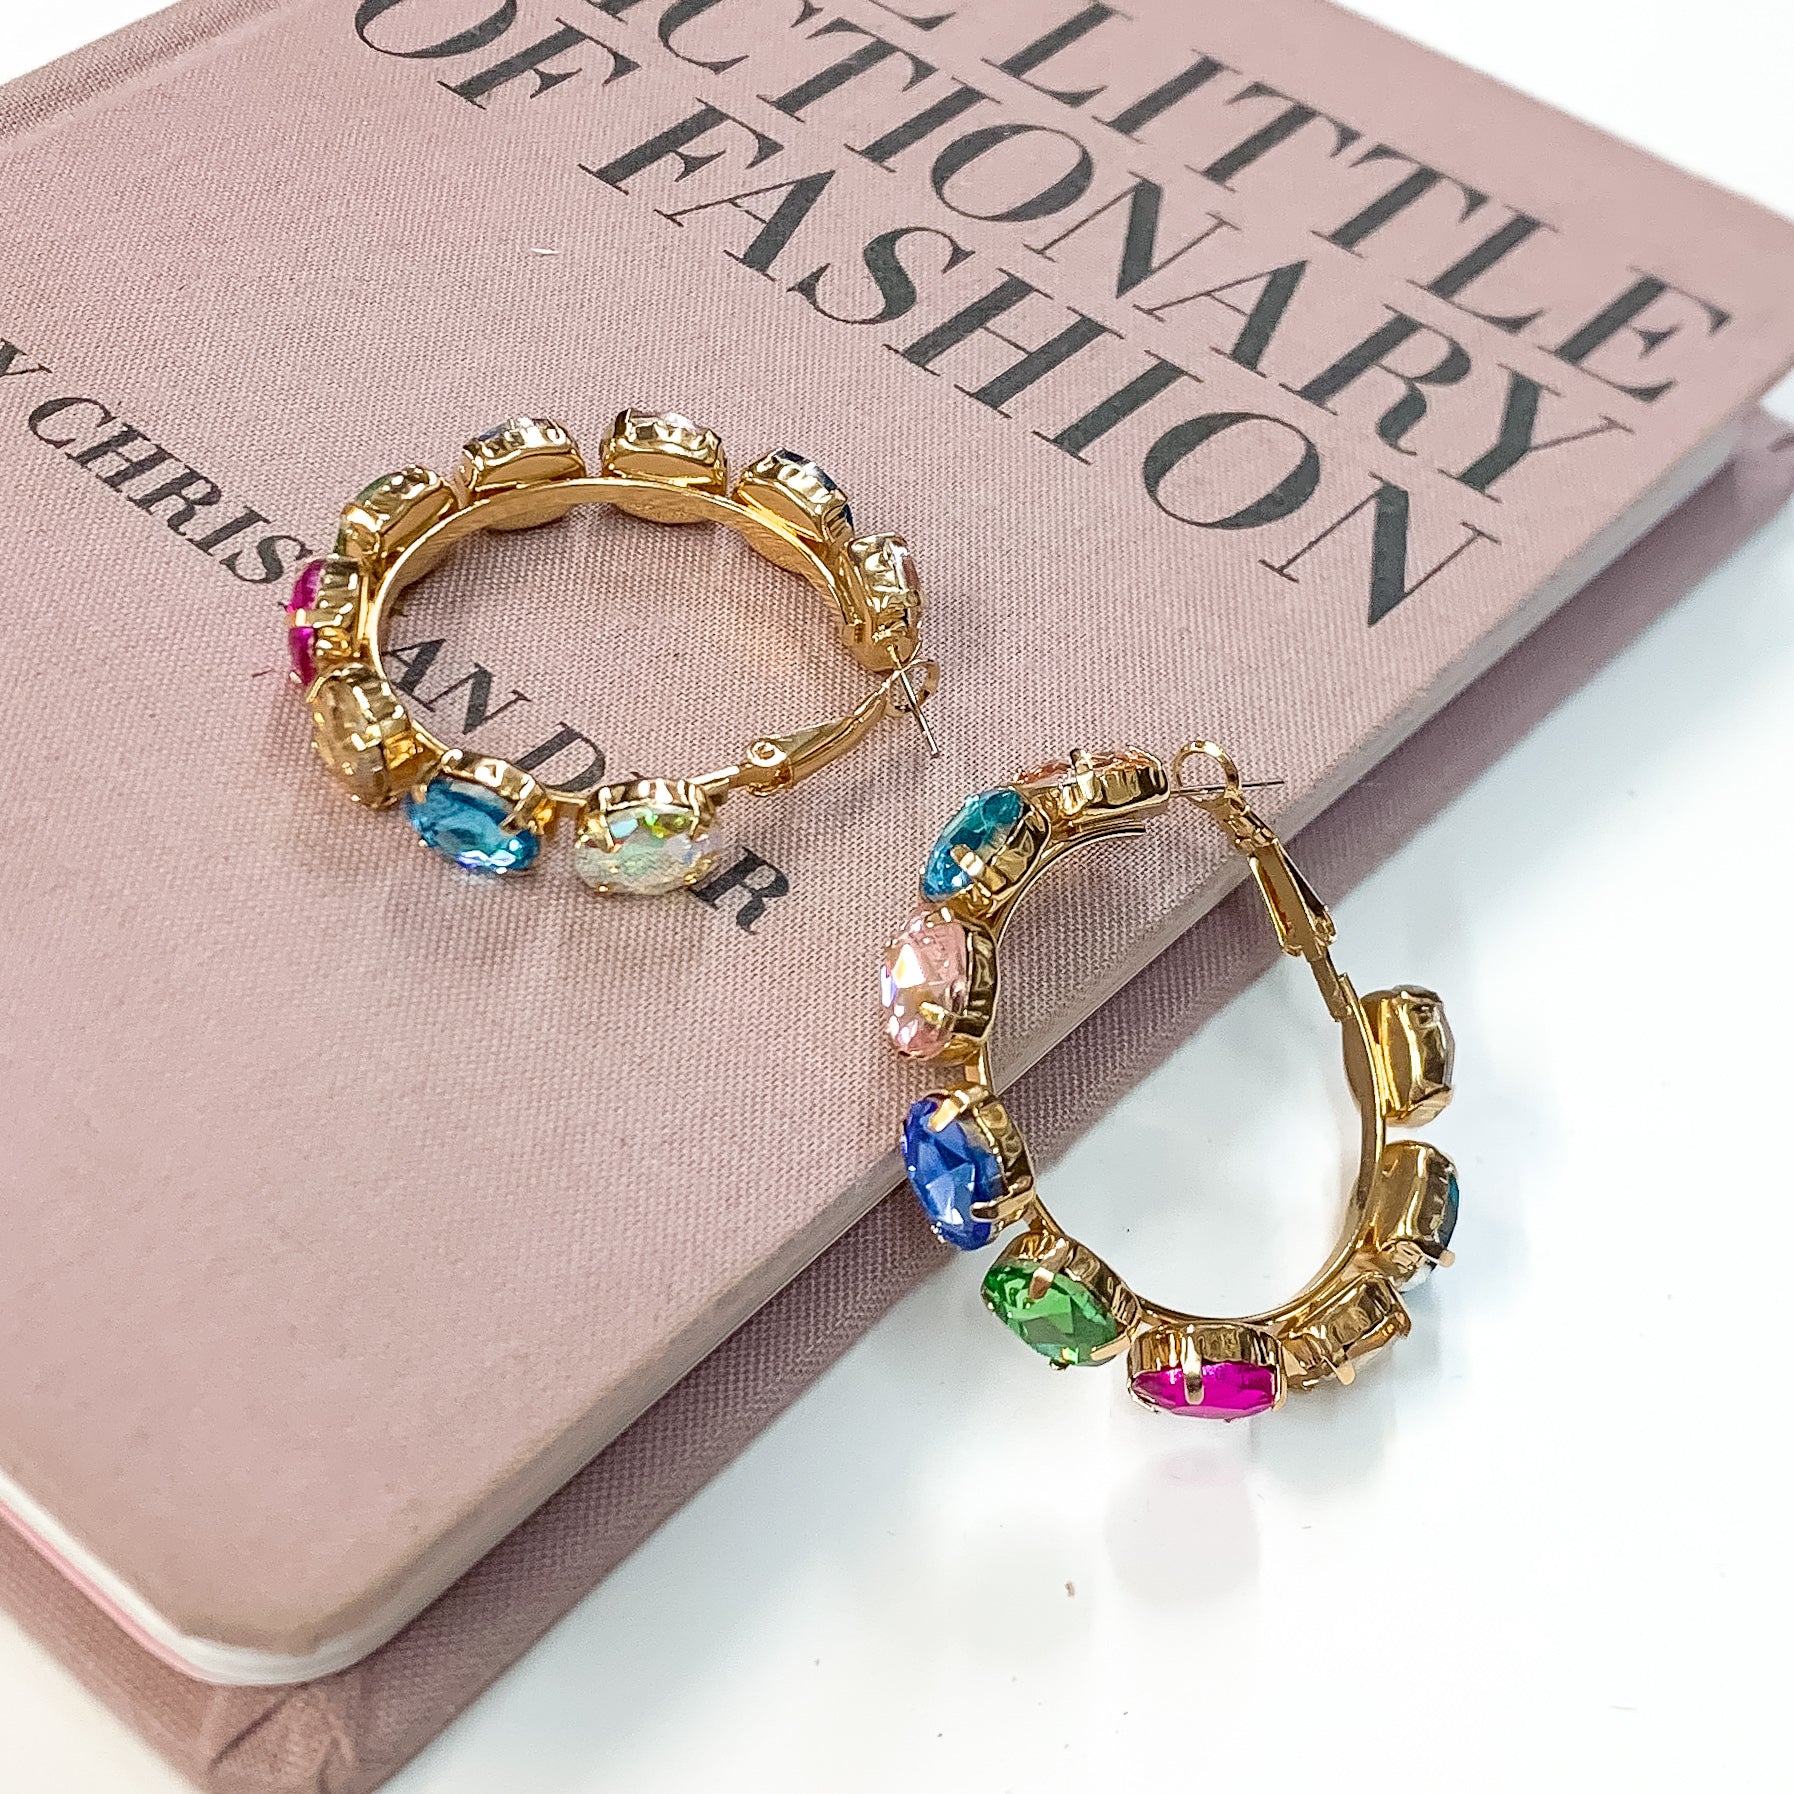 Pink Panache | Gold Tone Hoop Earrings with Multicolored Oval Crystals - Giddy Up Glamour Boutique